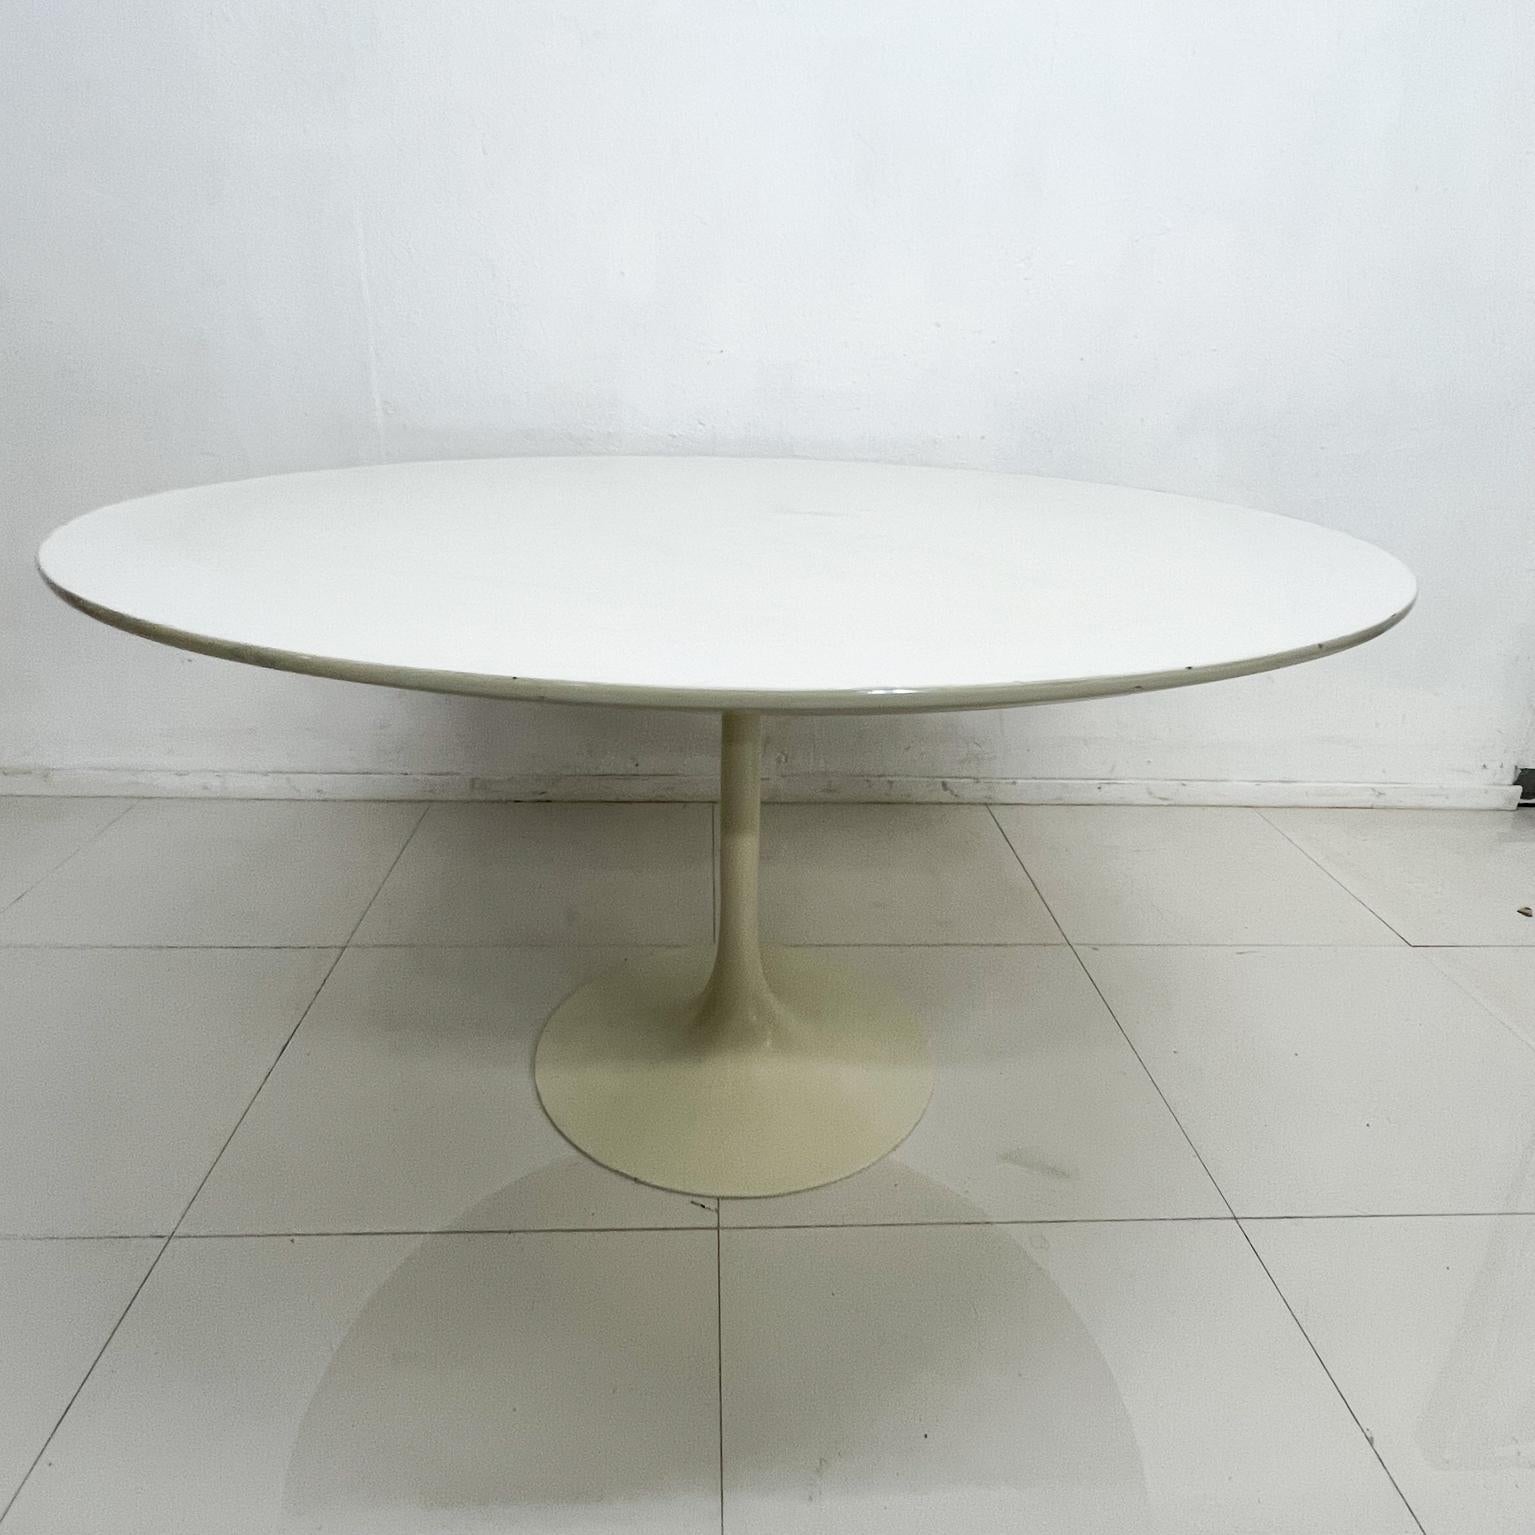 White dining table
Style of Eero Saarinen for Knoll Tulip Dining table design knife edge in white Formica on an aluminum base. Base screws into top from underside.
Attributed to Eero Saarinen.
No label present.
Preowned unrestored vintage